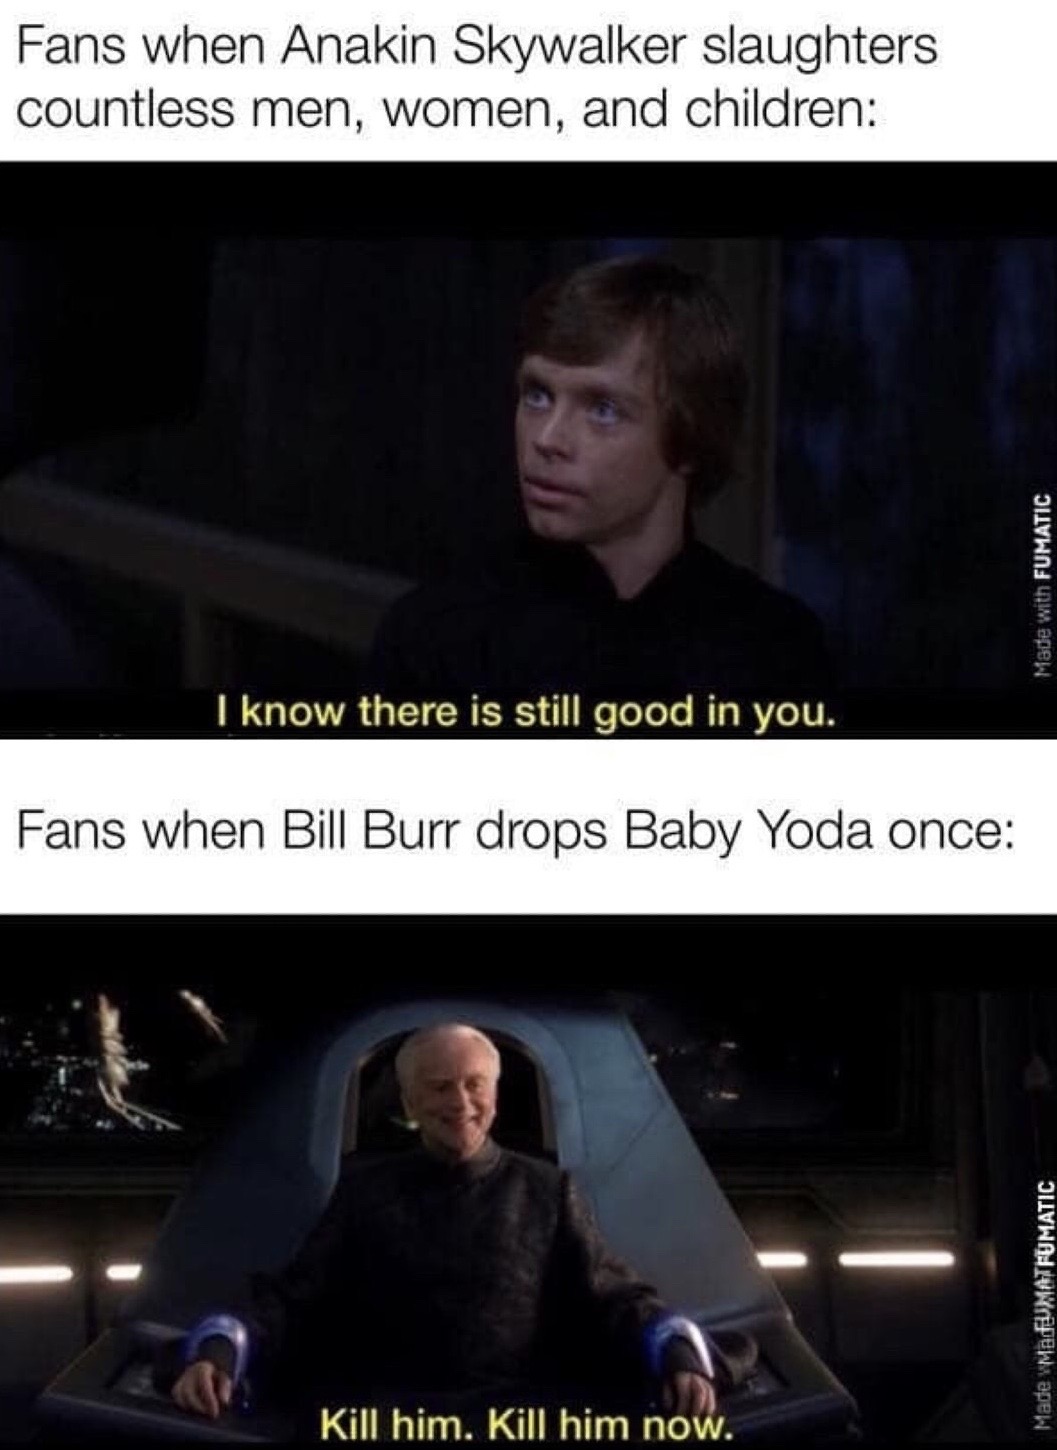 kill him kill him now - Fans when Anakin Skywalker slaughters countless men, women, and children Made with Fumatic I know there is still good in you. Fans when Bill Burr drops Baby Yoda once Made MadUMATFUMATIC Kill him. Kill him now.